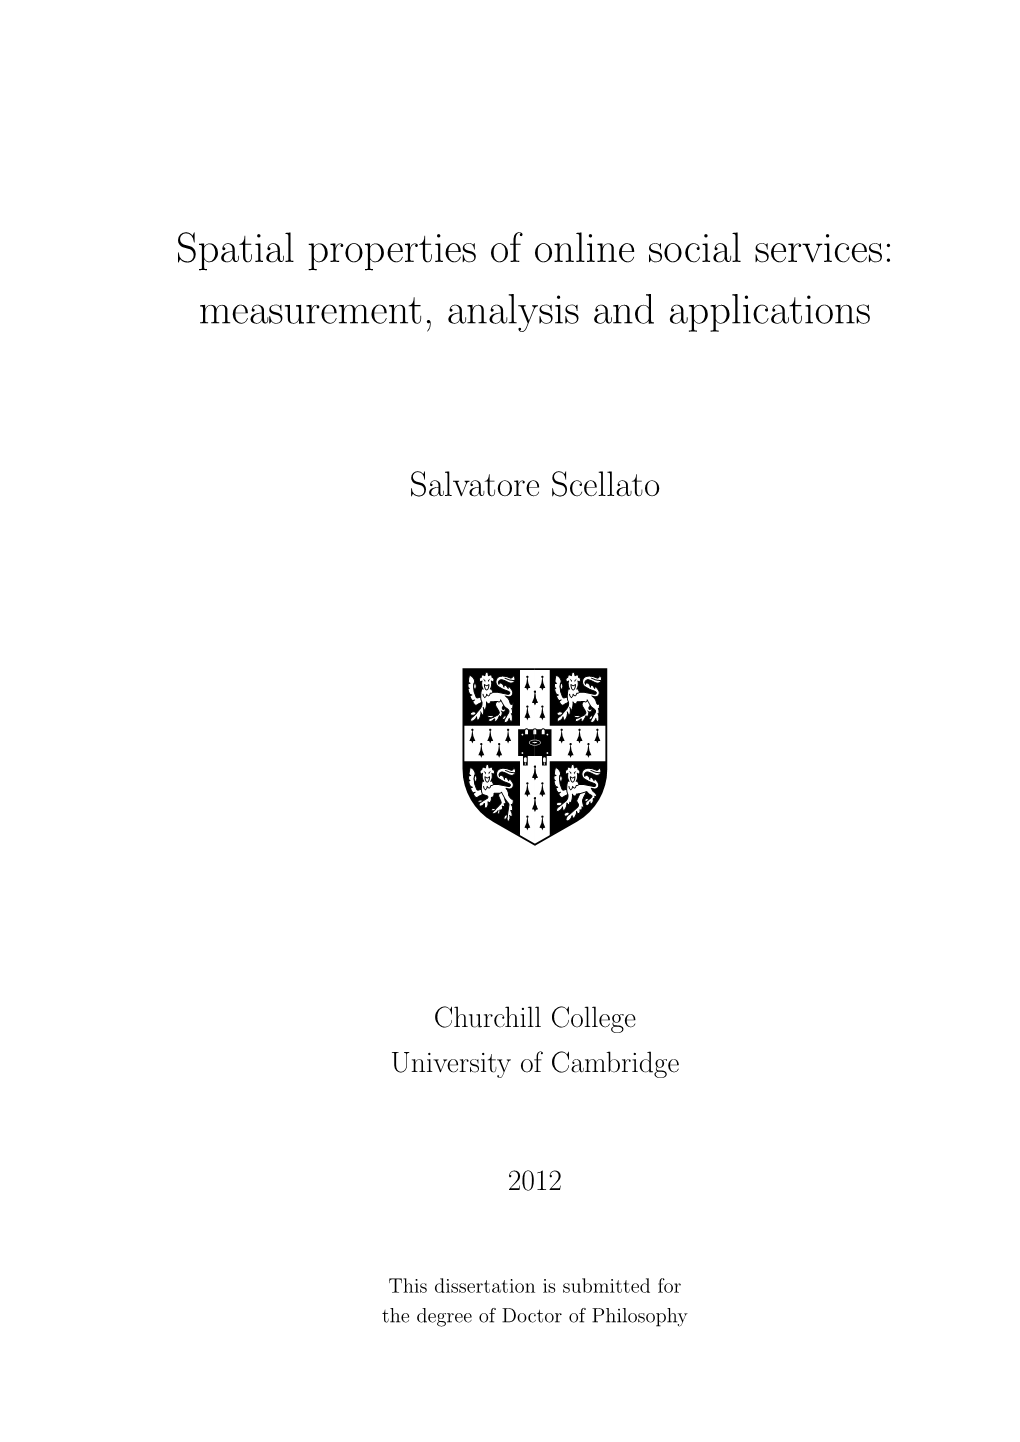 Spatial Properties of Online Social Services: Measurement, Analysis and Applications